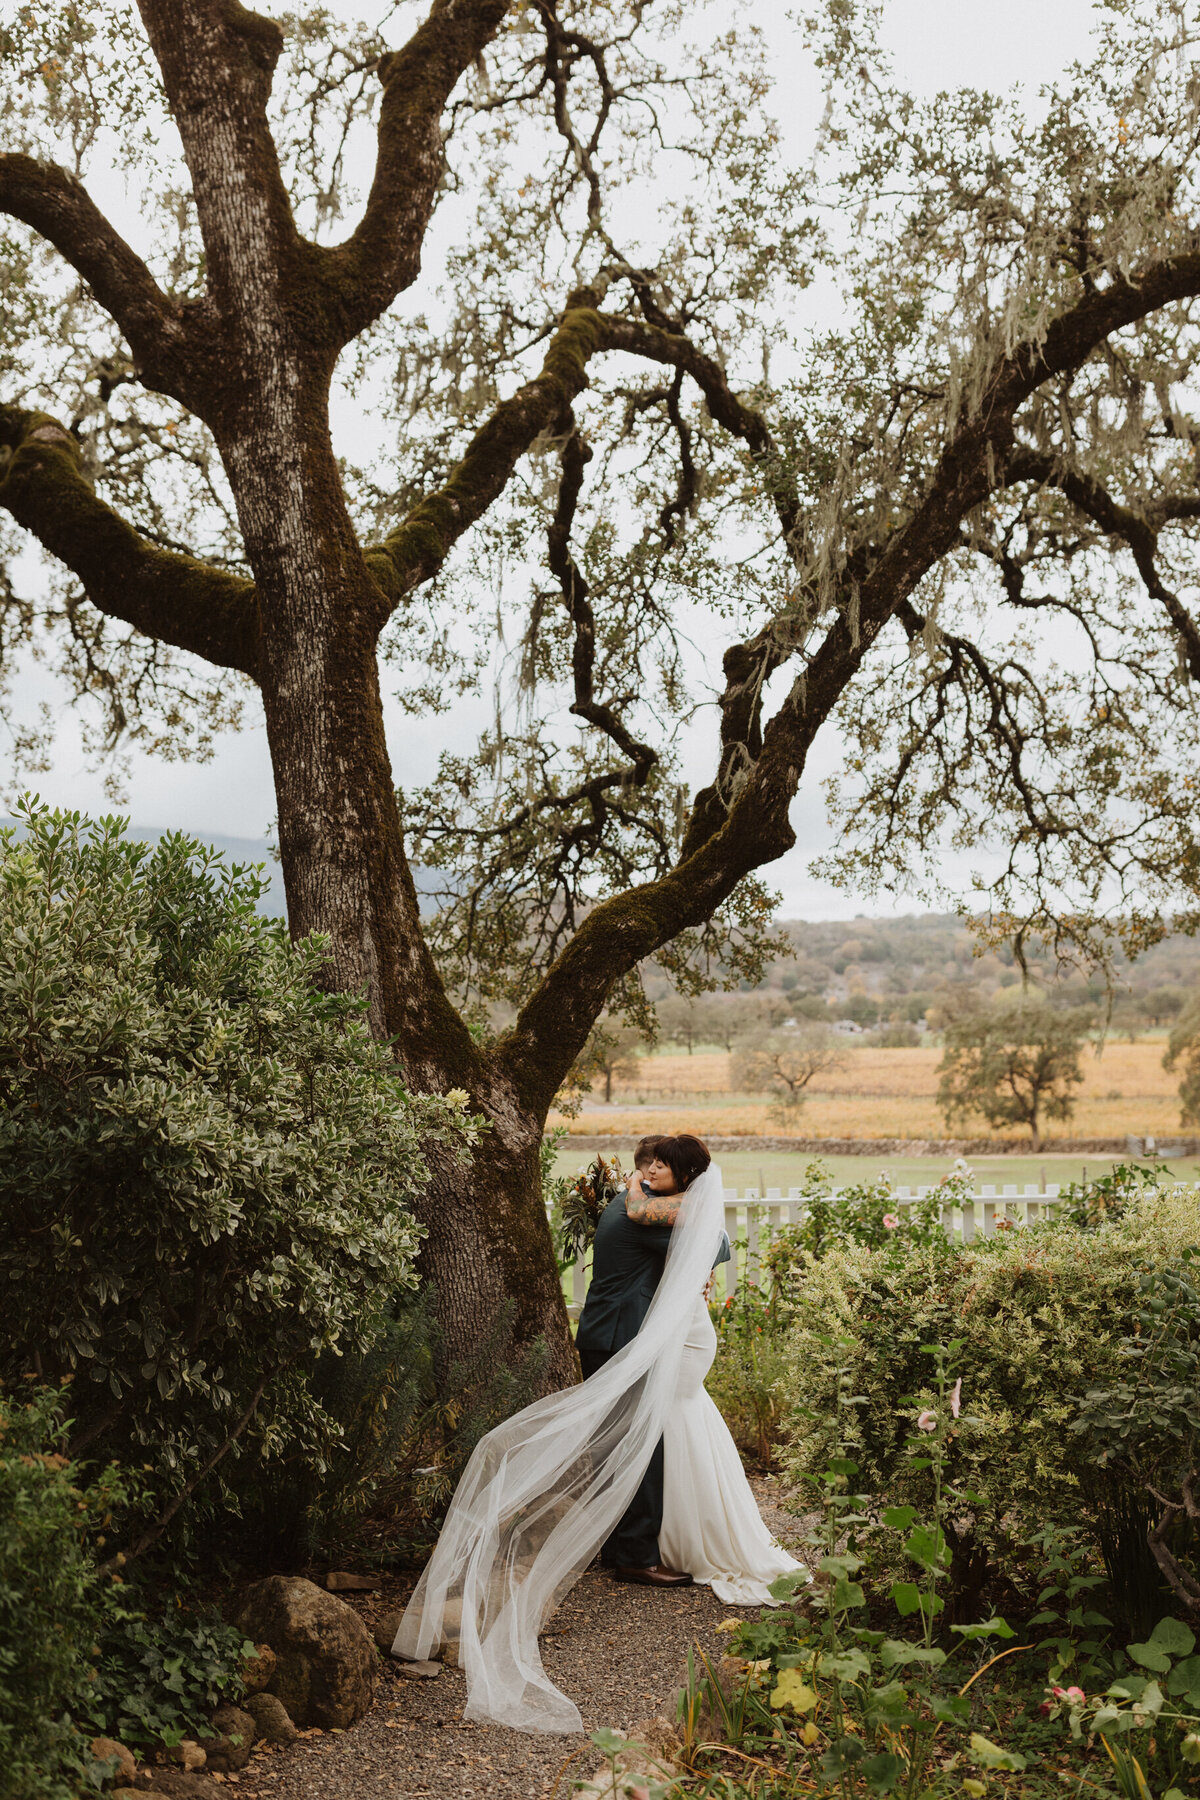 Newlyweds kissing under oak tree surrounded by green bushes while bride's veil wraps around them